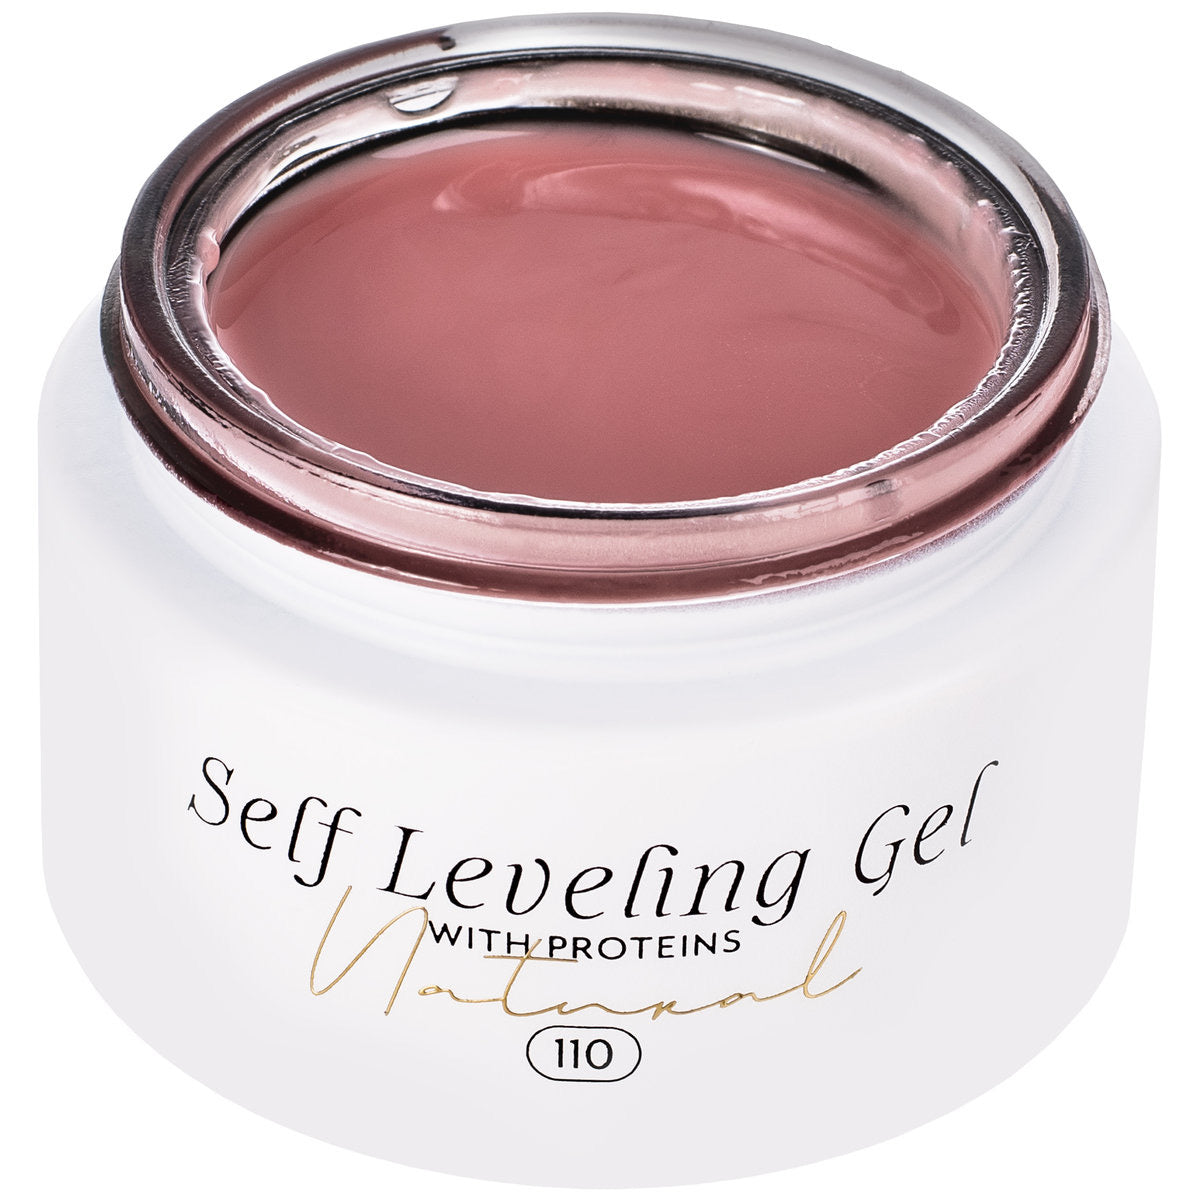 SELF LEVELING GEL WITH PROTEINS 110 NATURAL